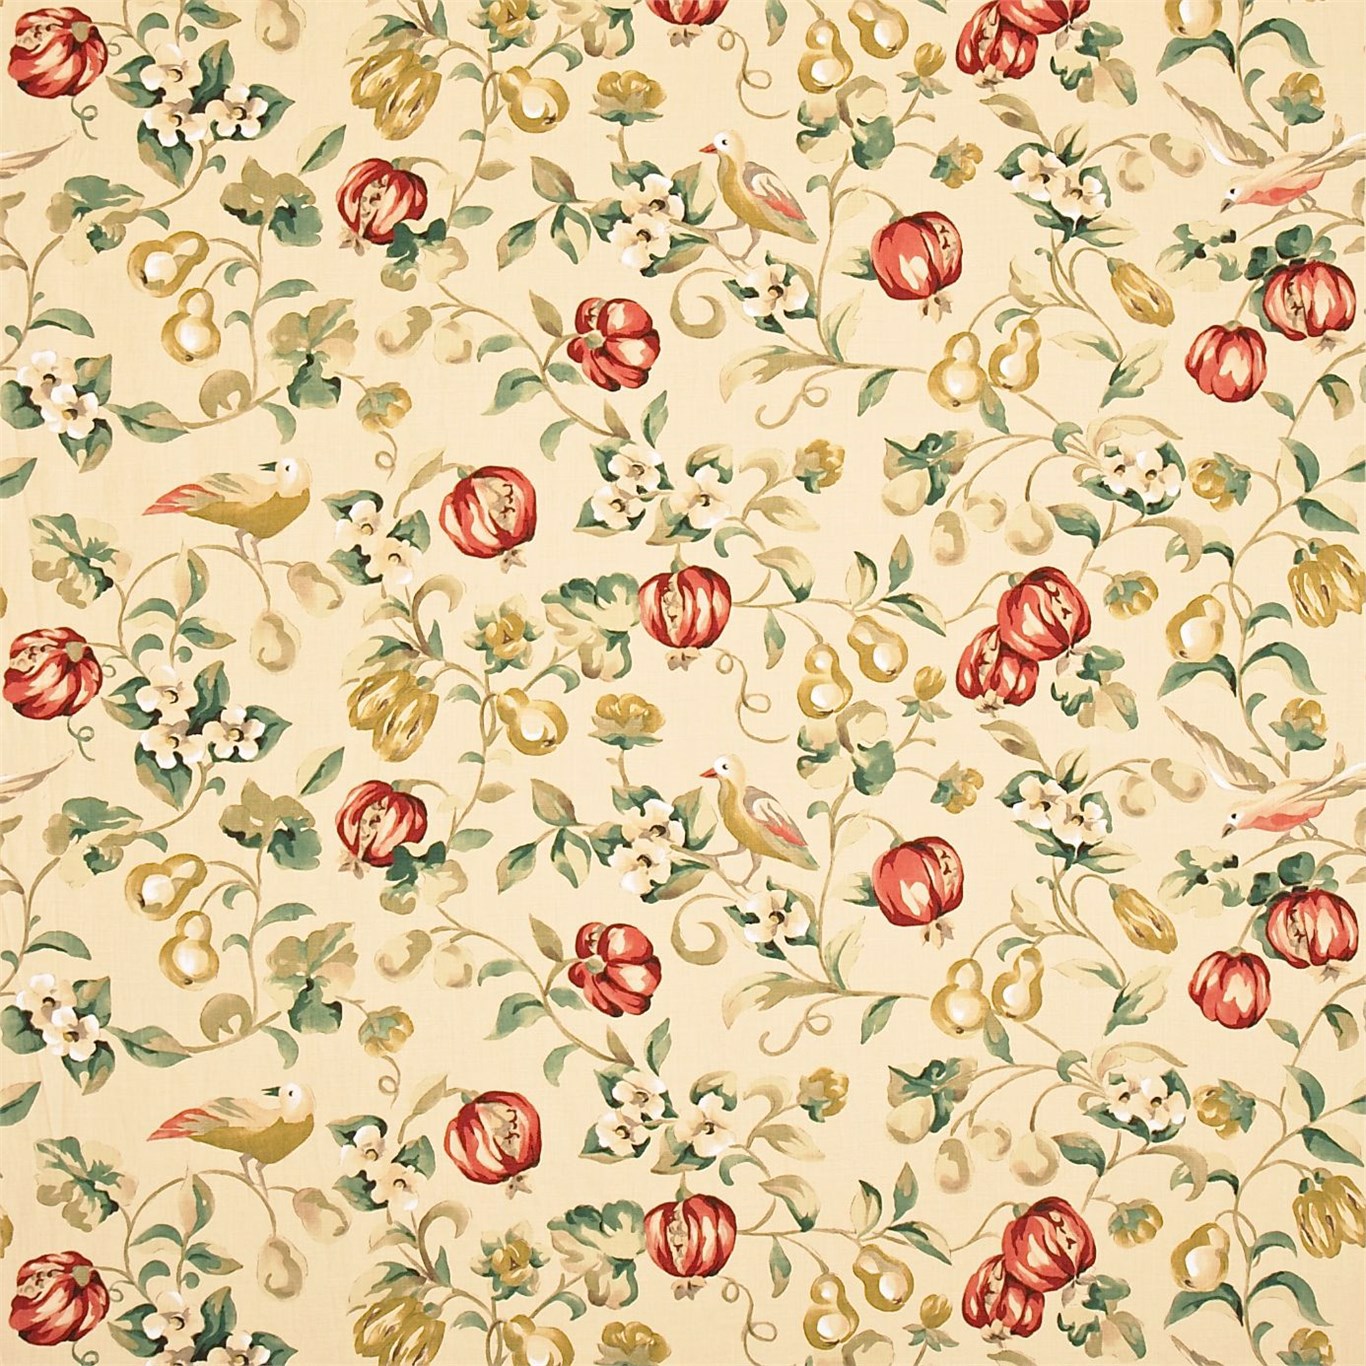 Pear & Pomegranate Teal/Cherry Fabric by SAN